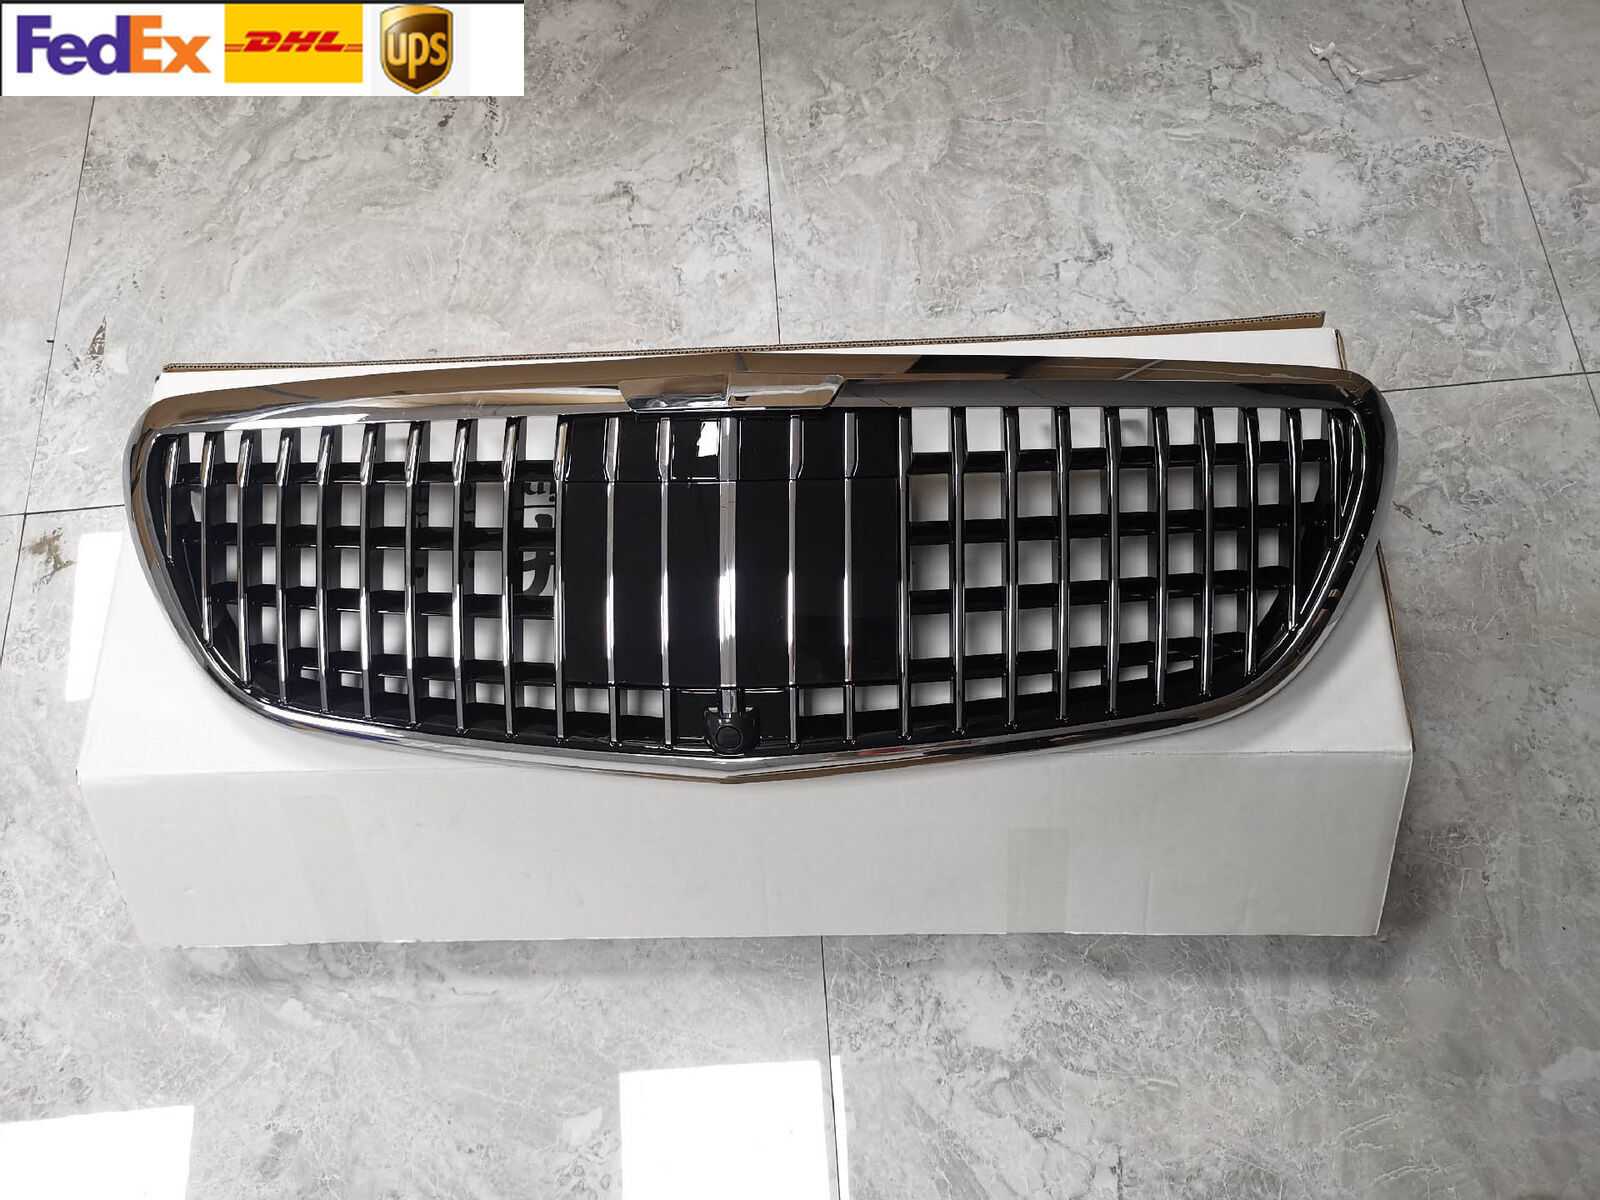 New Chrome S680 Maybach Grille with ACC for Mercedes Benz W222 S class 2014-2019